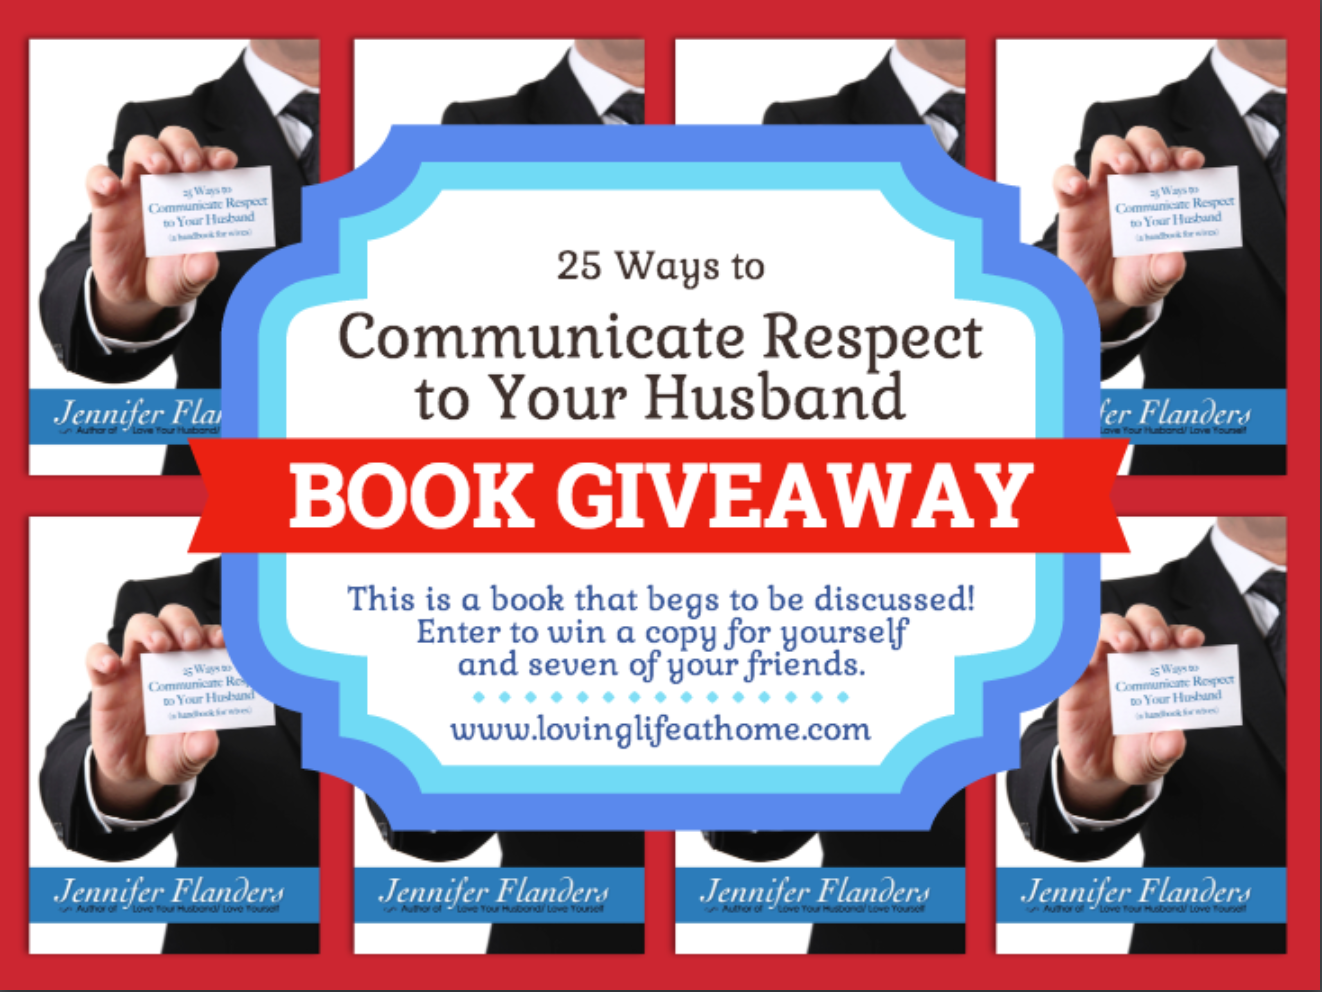 A book to discuss with your married friends -- enter to win 8 copies, and you can easily do just that!